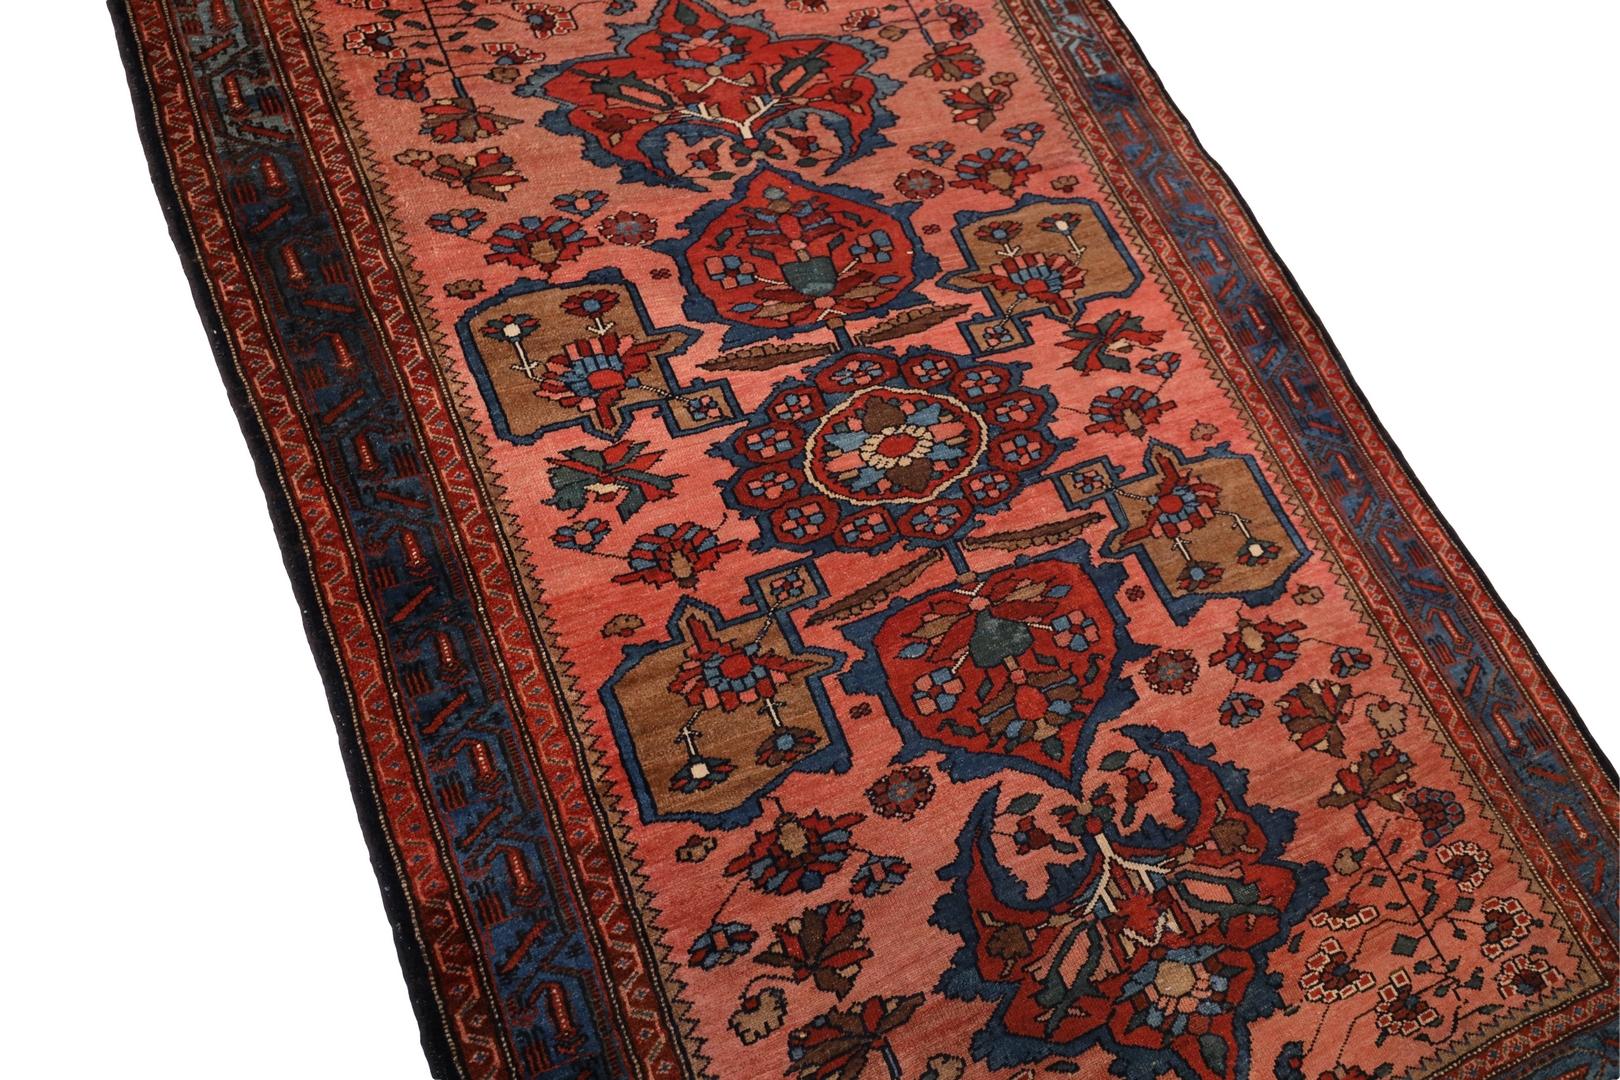 Hand-Knotted Lillihan Antique Rug, Salmon Red Khaki - 4'7